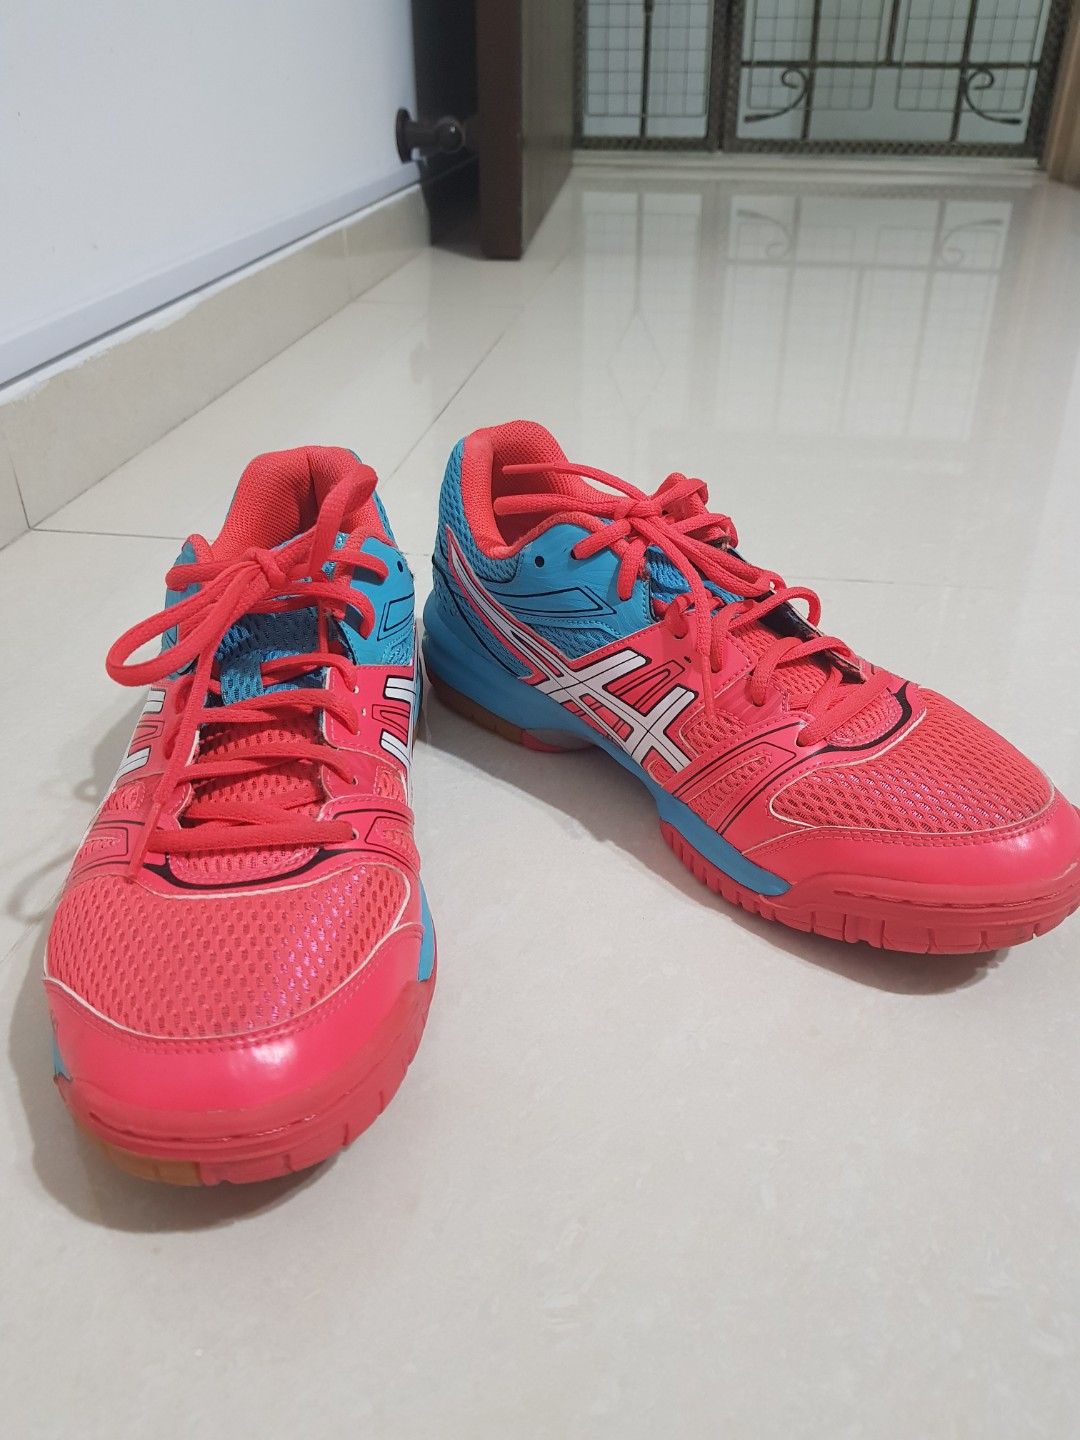 asics shoes low price